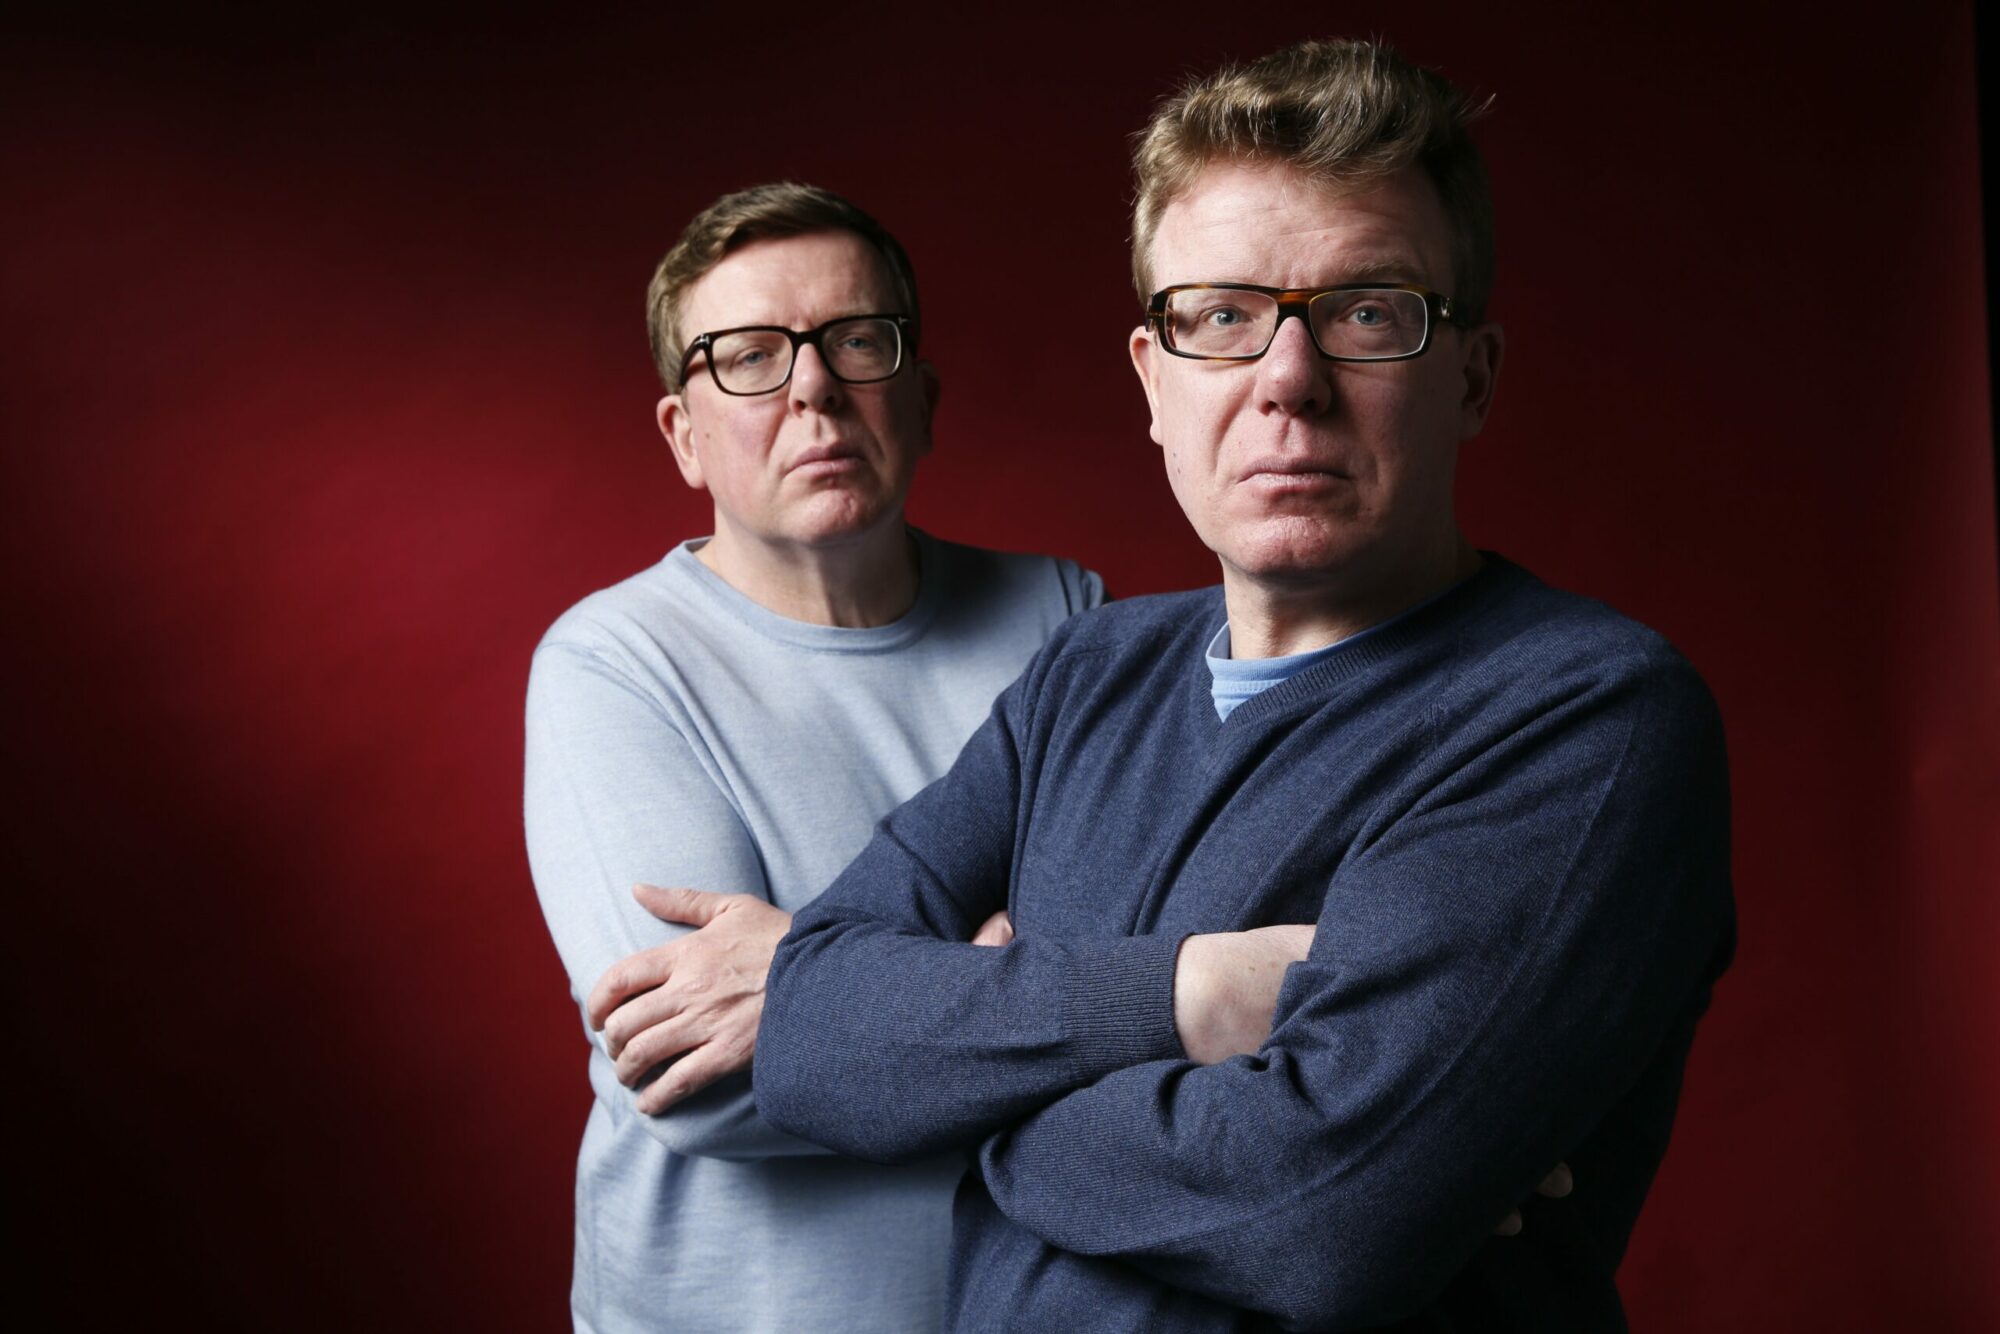 Image name The Proclaimers at Leeds Grand Theatre Leeds scaled the 1 image from the post The Proclaimers at Leeds Grand Theatre, Leeds in Yorkshire.com.